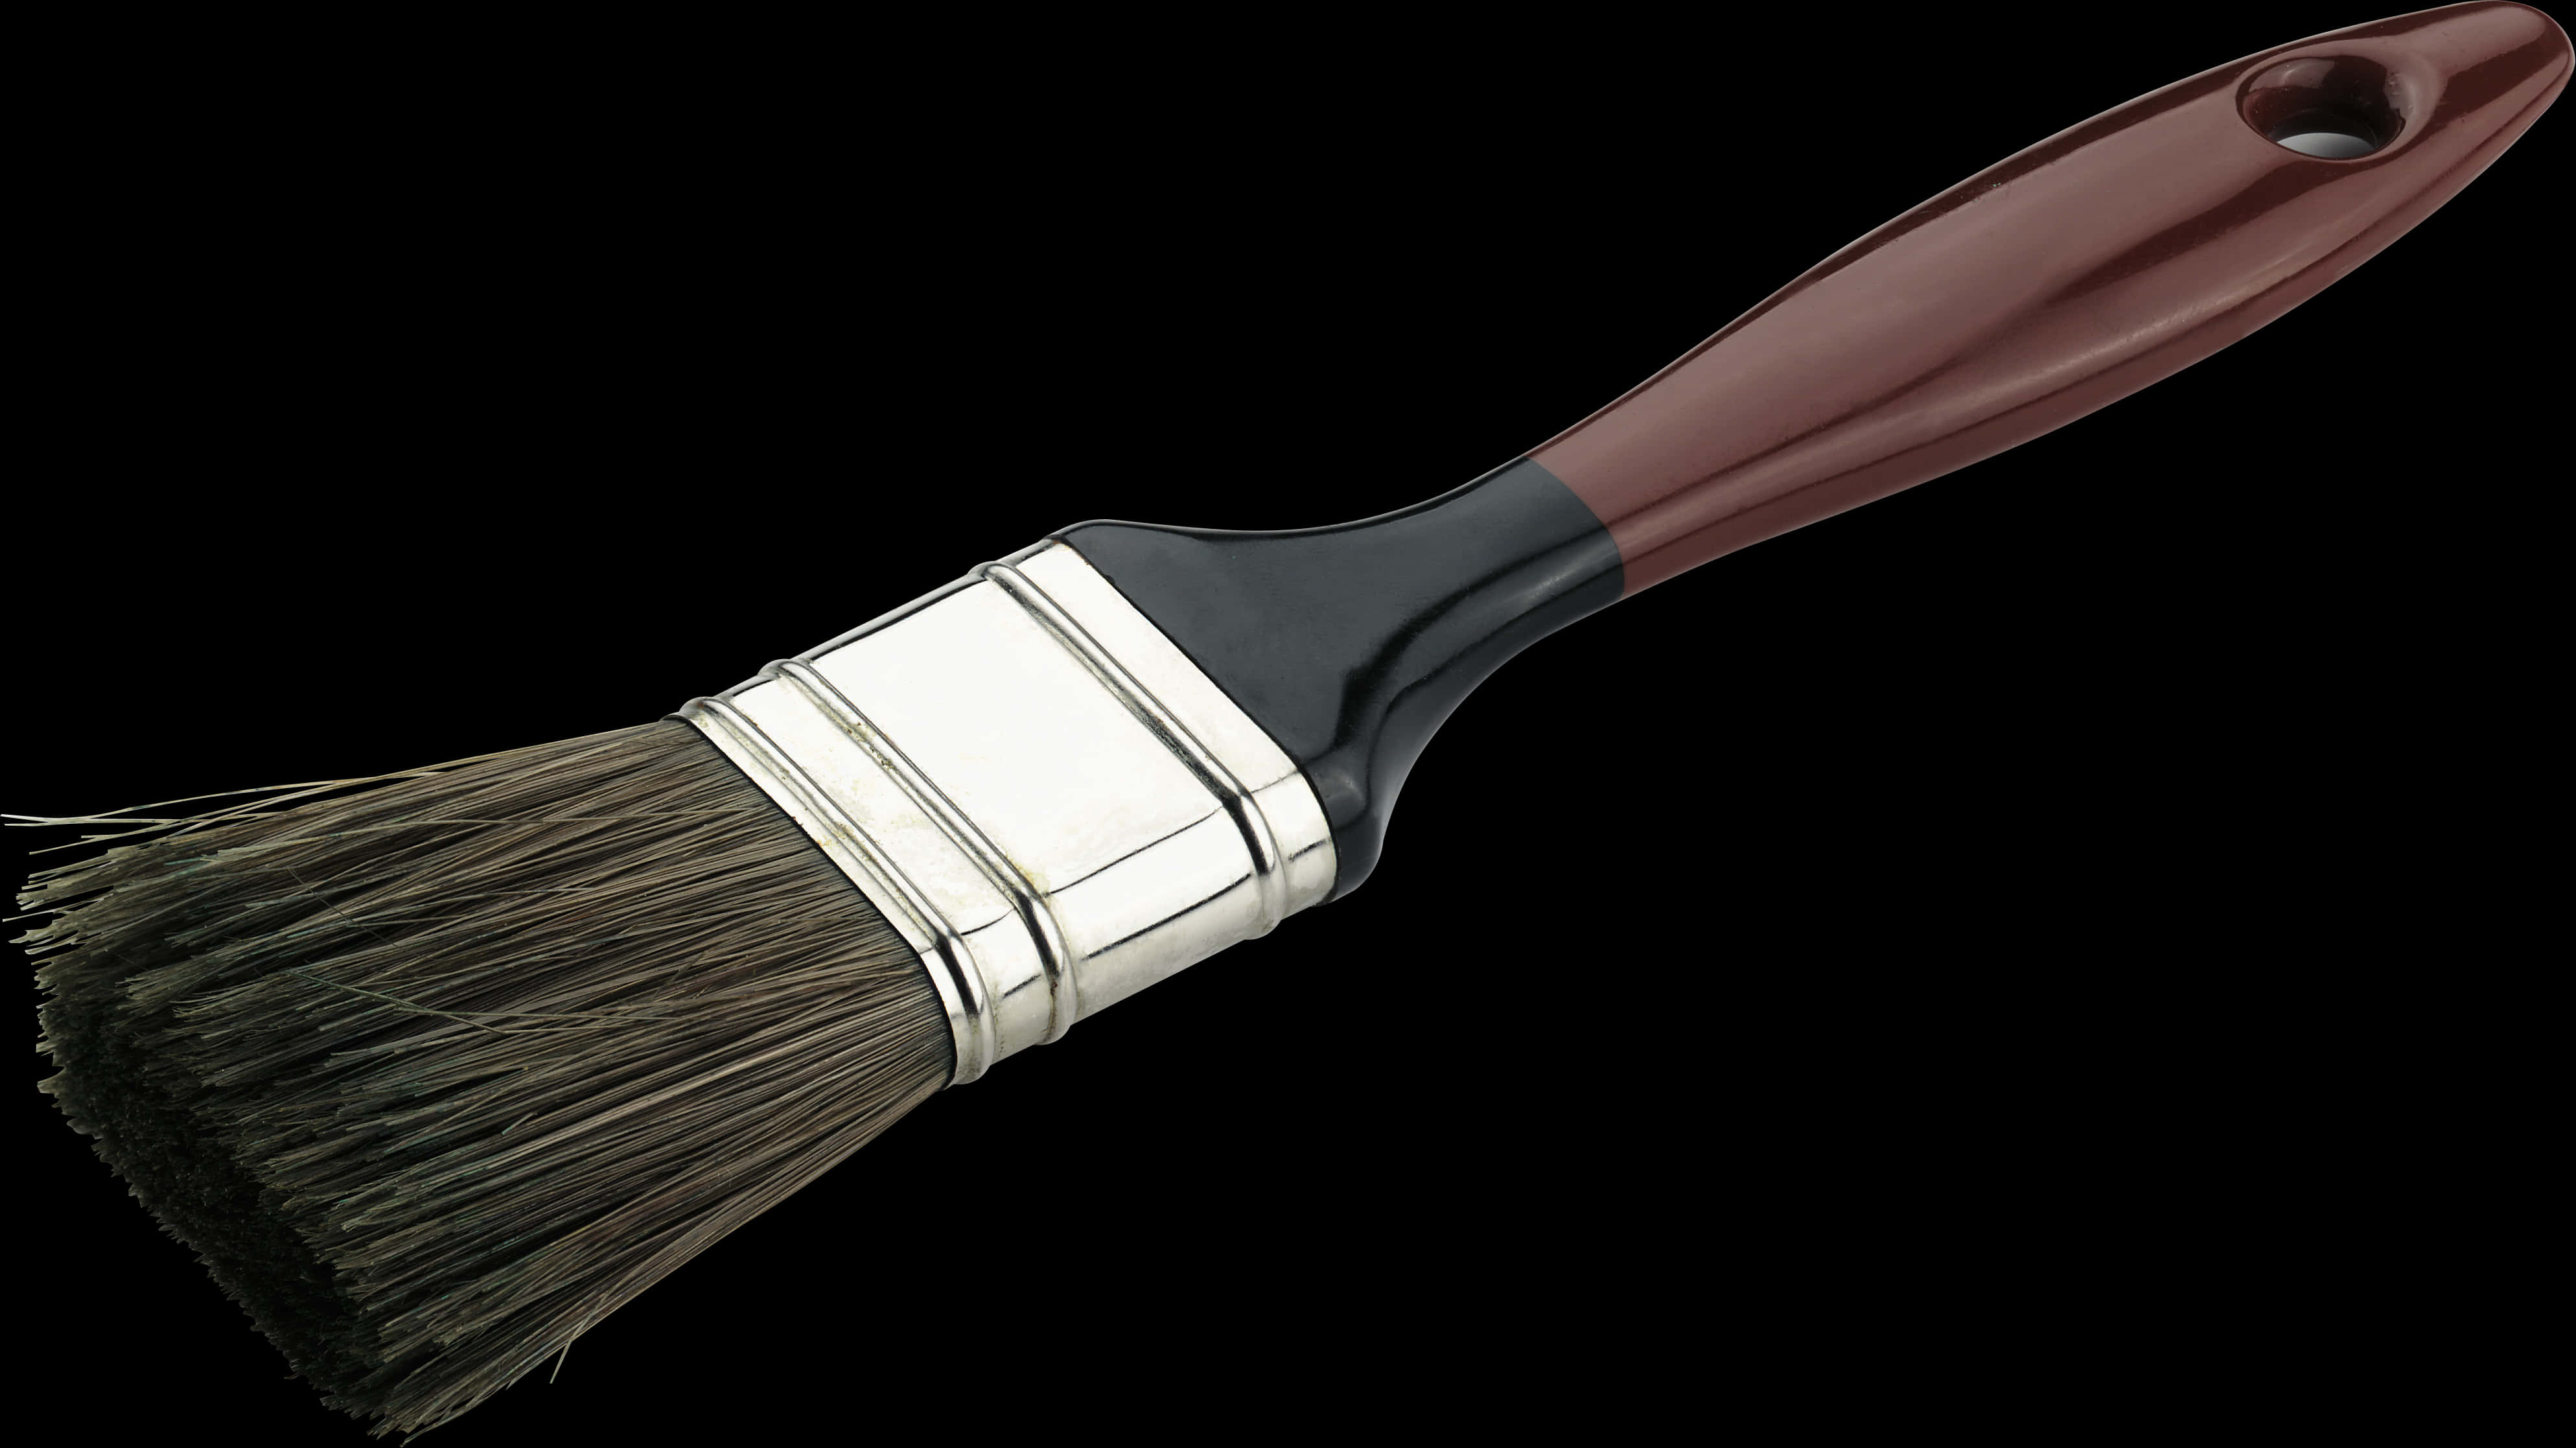 A Close Up Of A Paint Brush